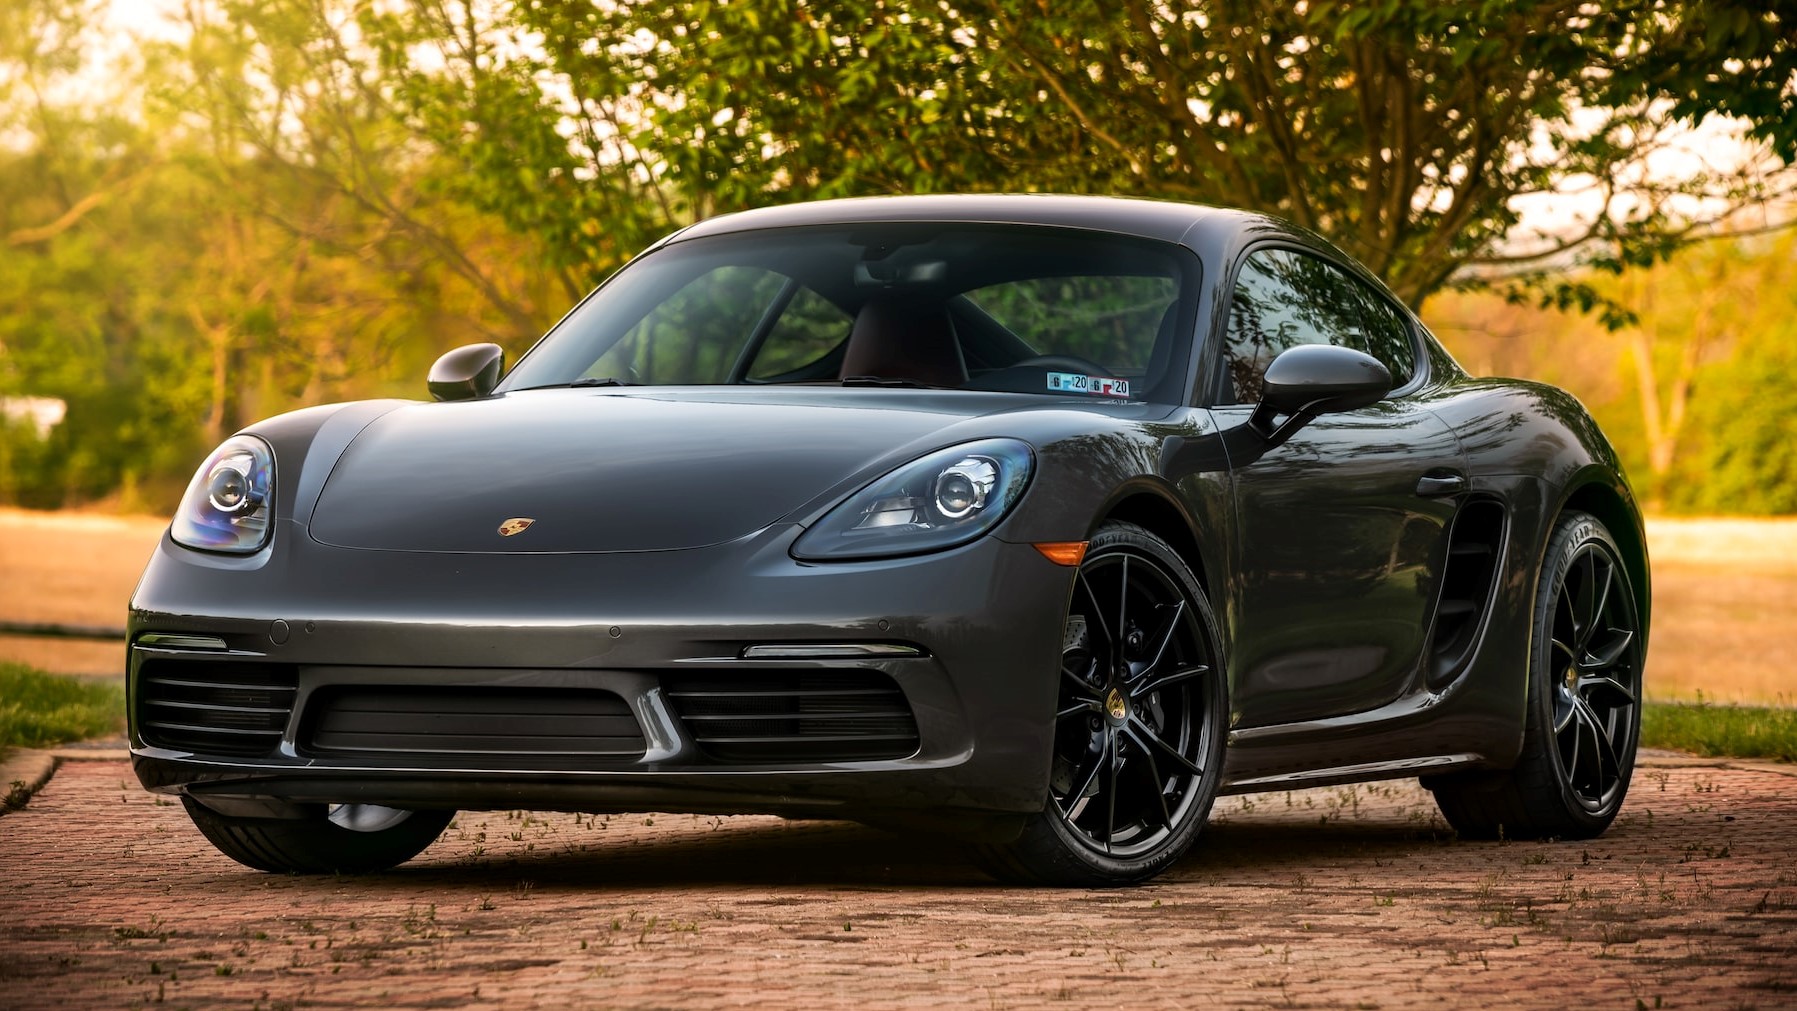 Porsche Cayman owned by Kahl Orr, Founder of Rise Marketing Co | Goodwill Car Donations